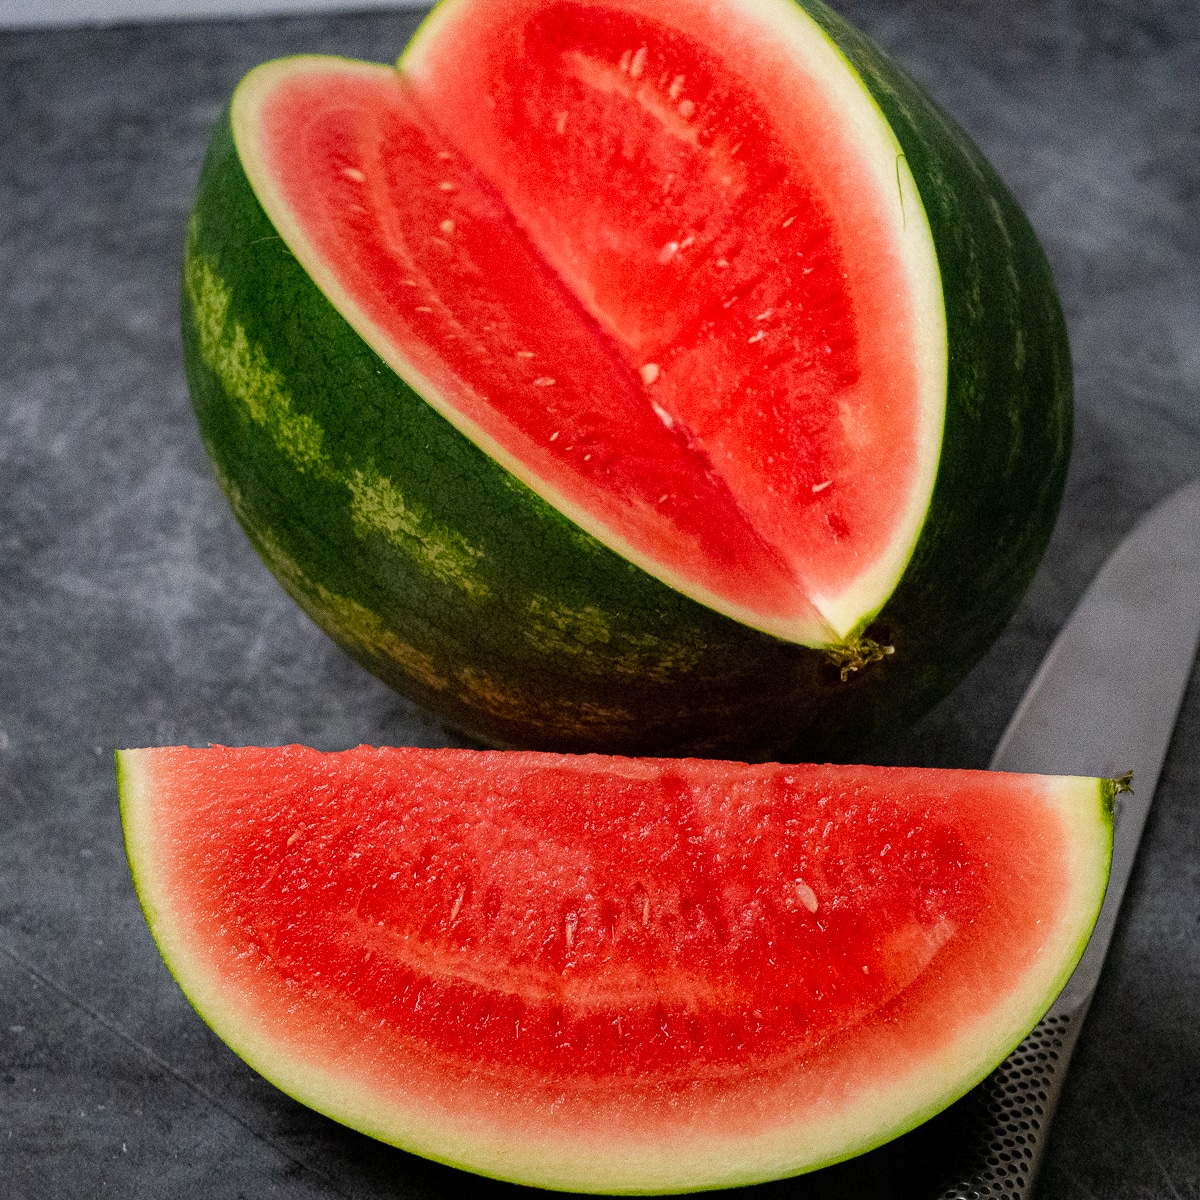 One whole watermelon with one quarter sliced.